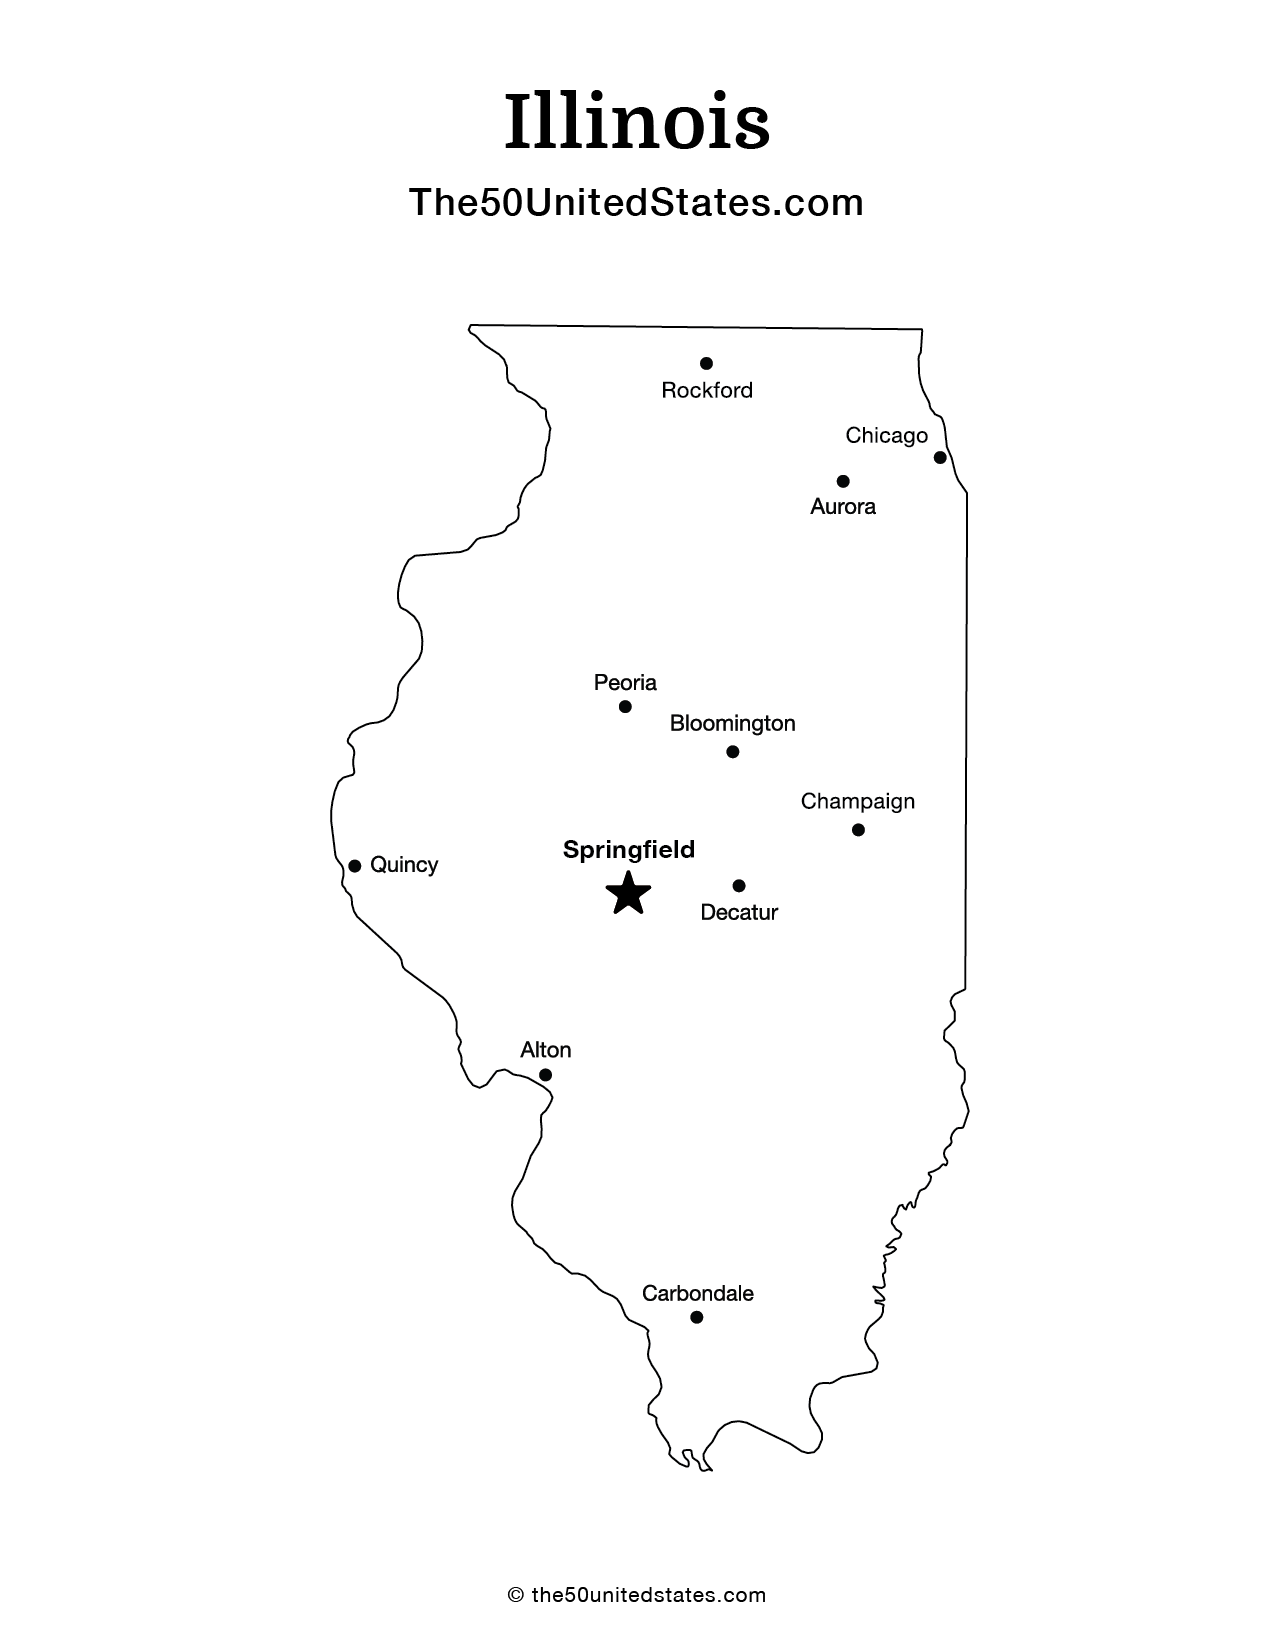 Illinois with Cities (Labeled)